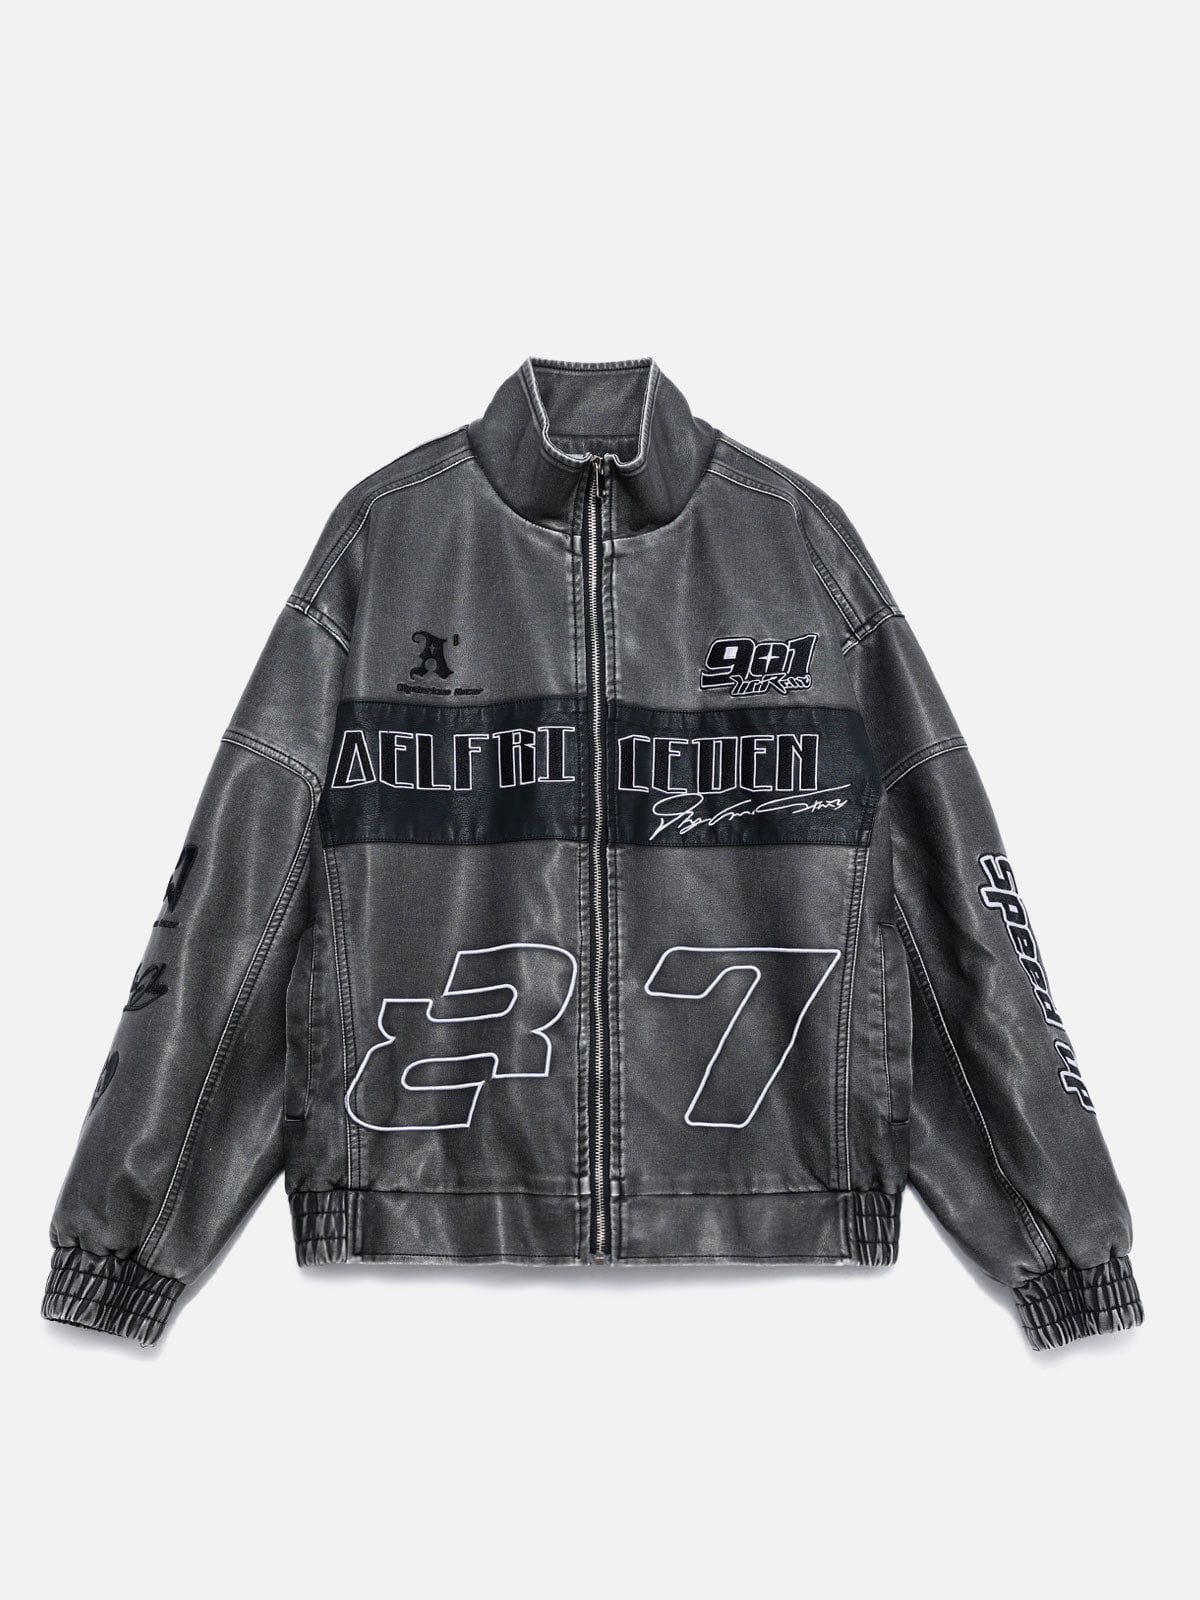 Aelfric Eden Embroidery Washed Racing Jacket